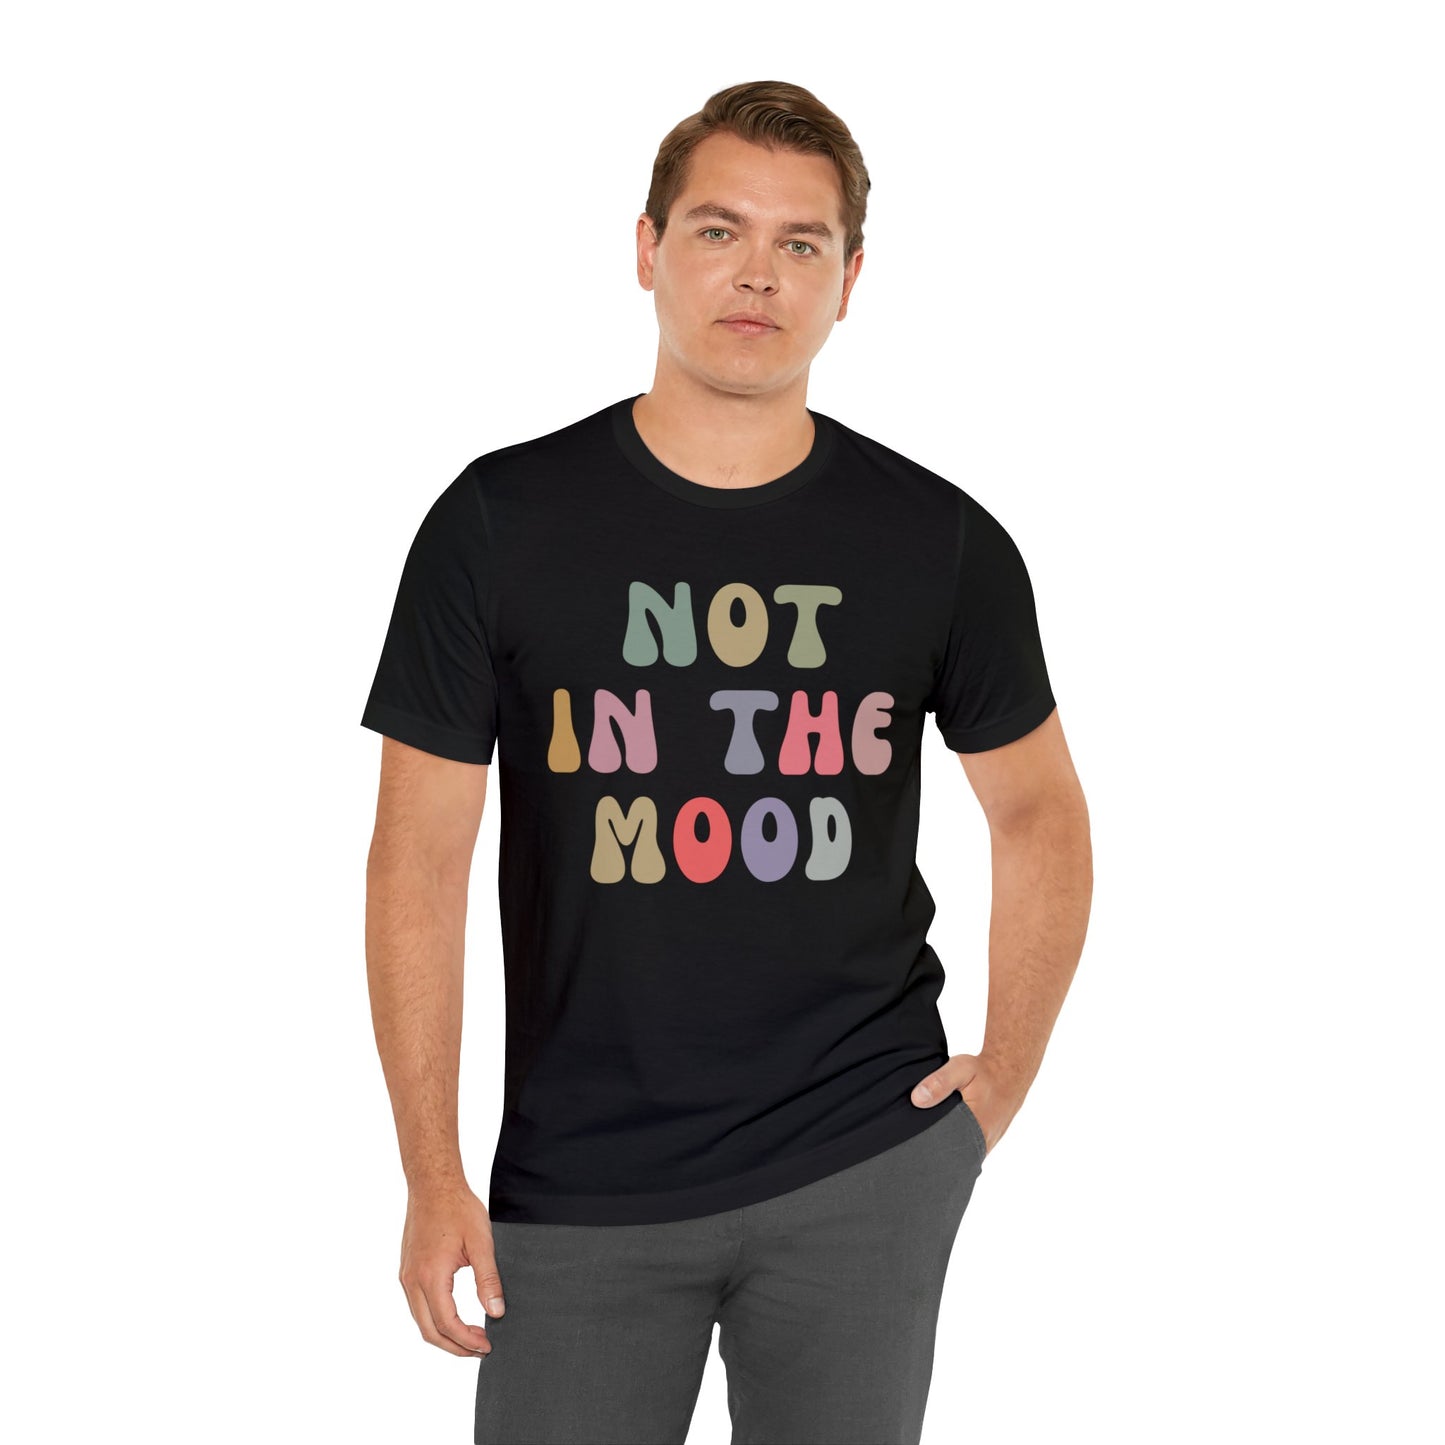 Not In The Mood Shirt, Funny Introvert Shirt, Funny Mood Shirt, Gift for Women, Sarcasm Shirt for Women, Gift for Girlfriend, T1183